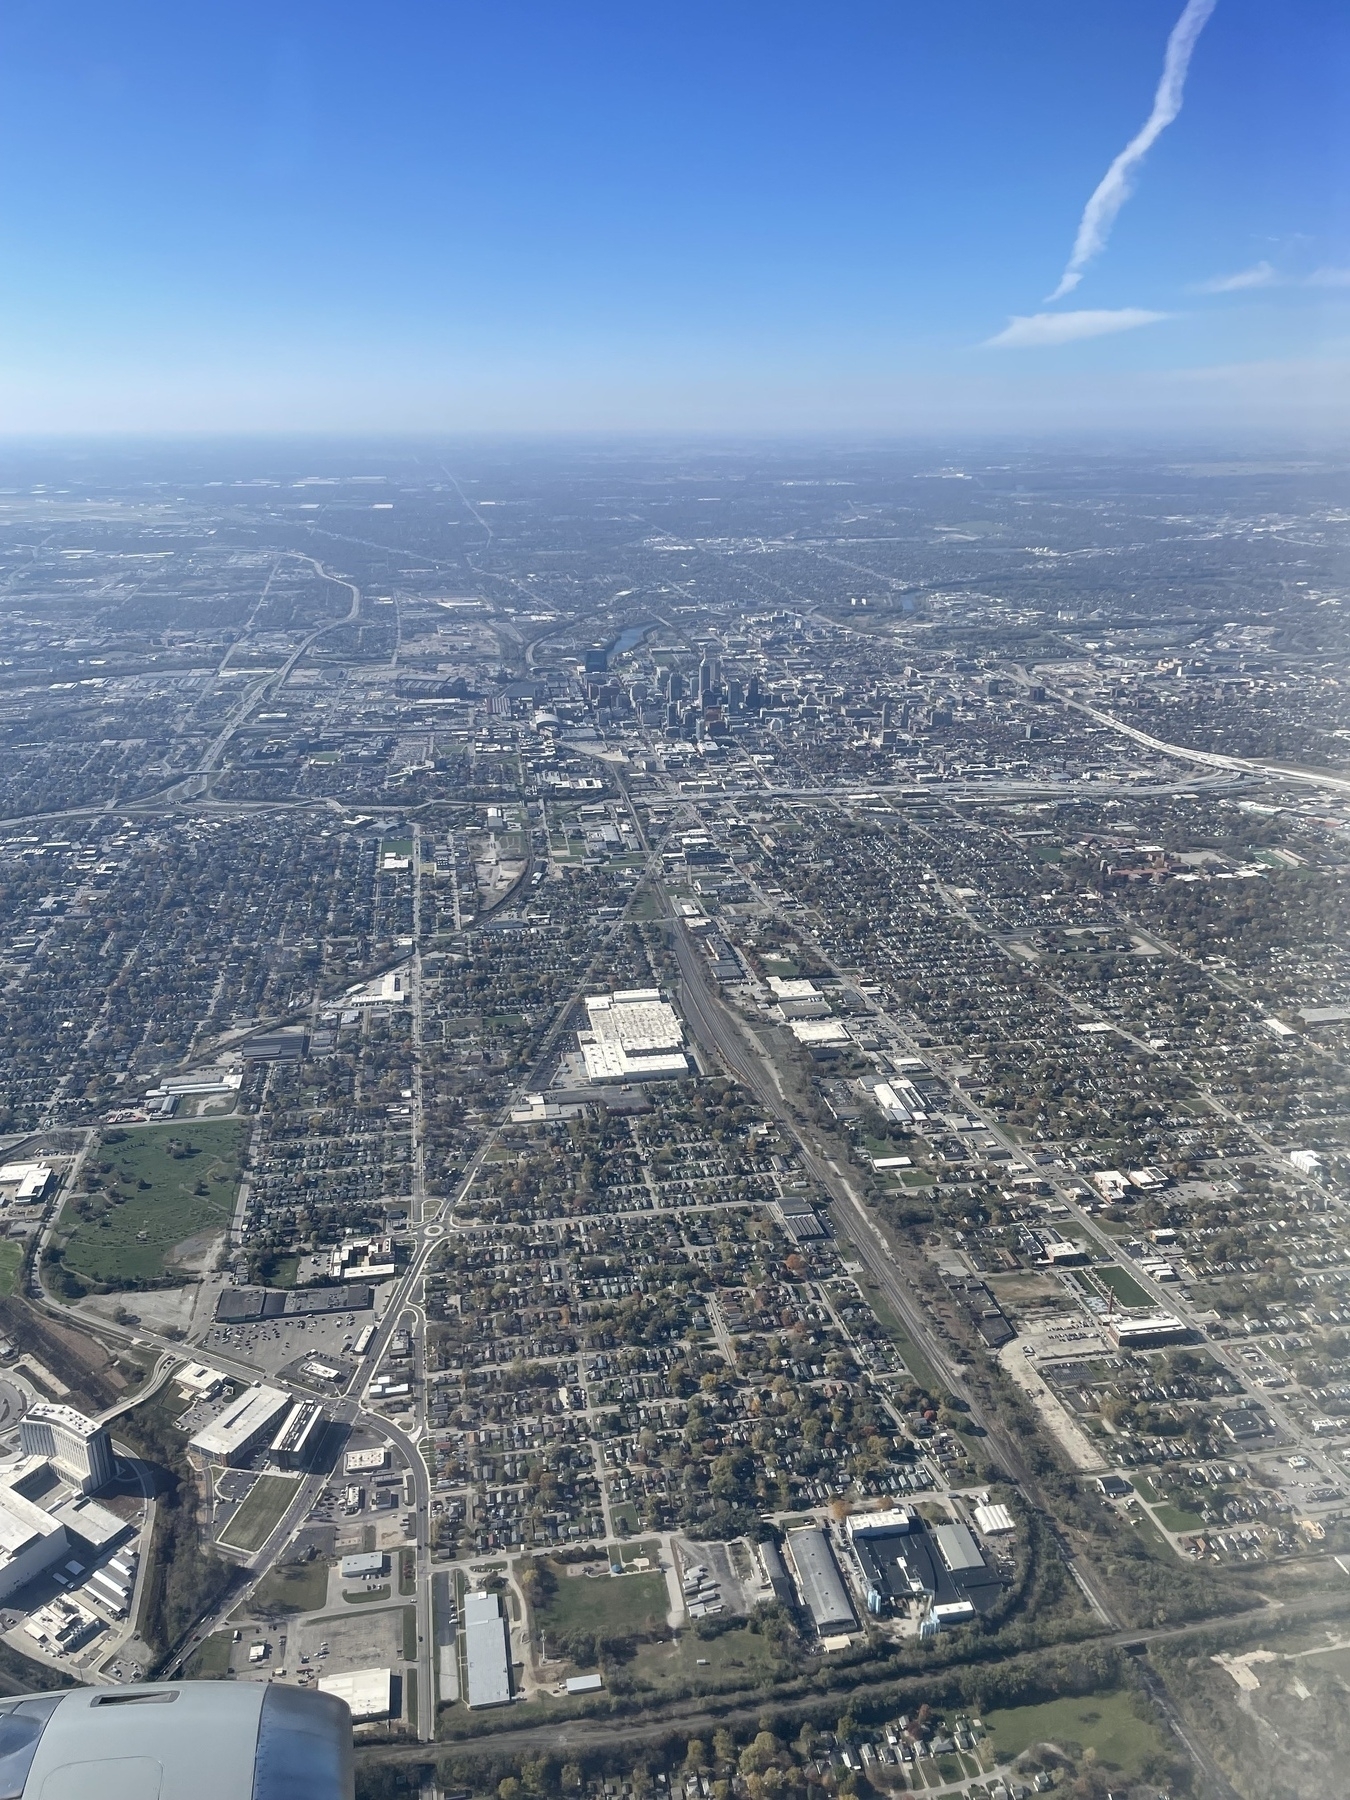 Downtown Indianapolis from the airplane